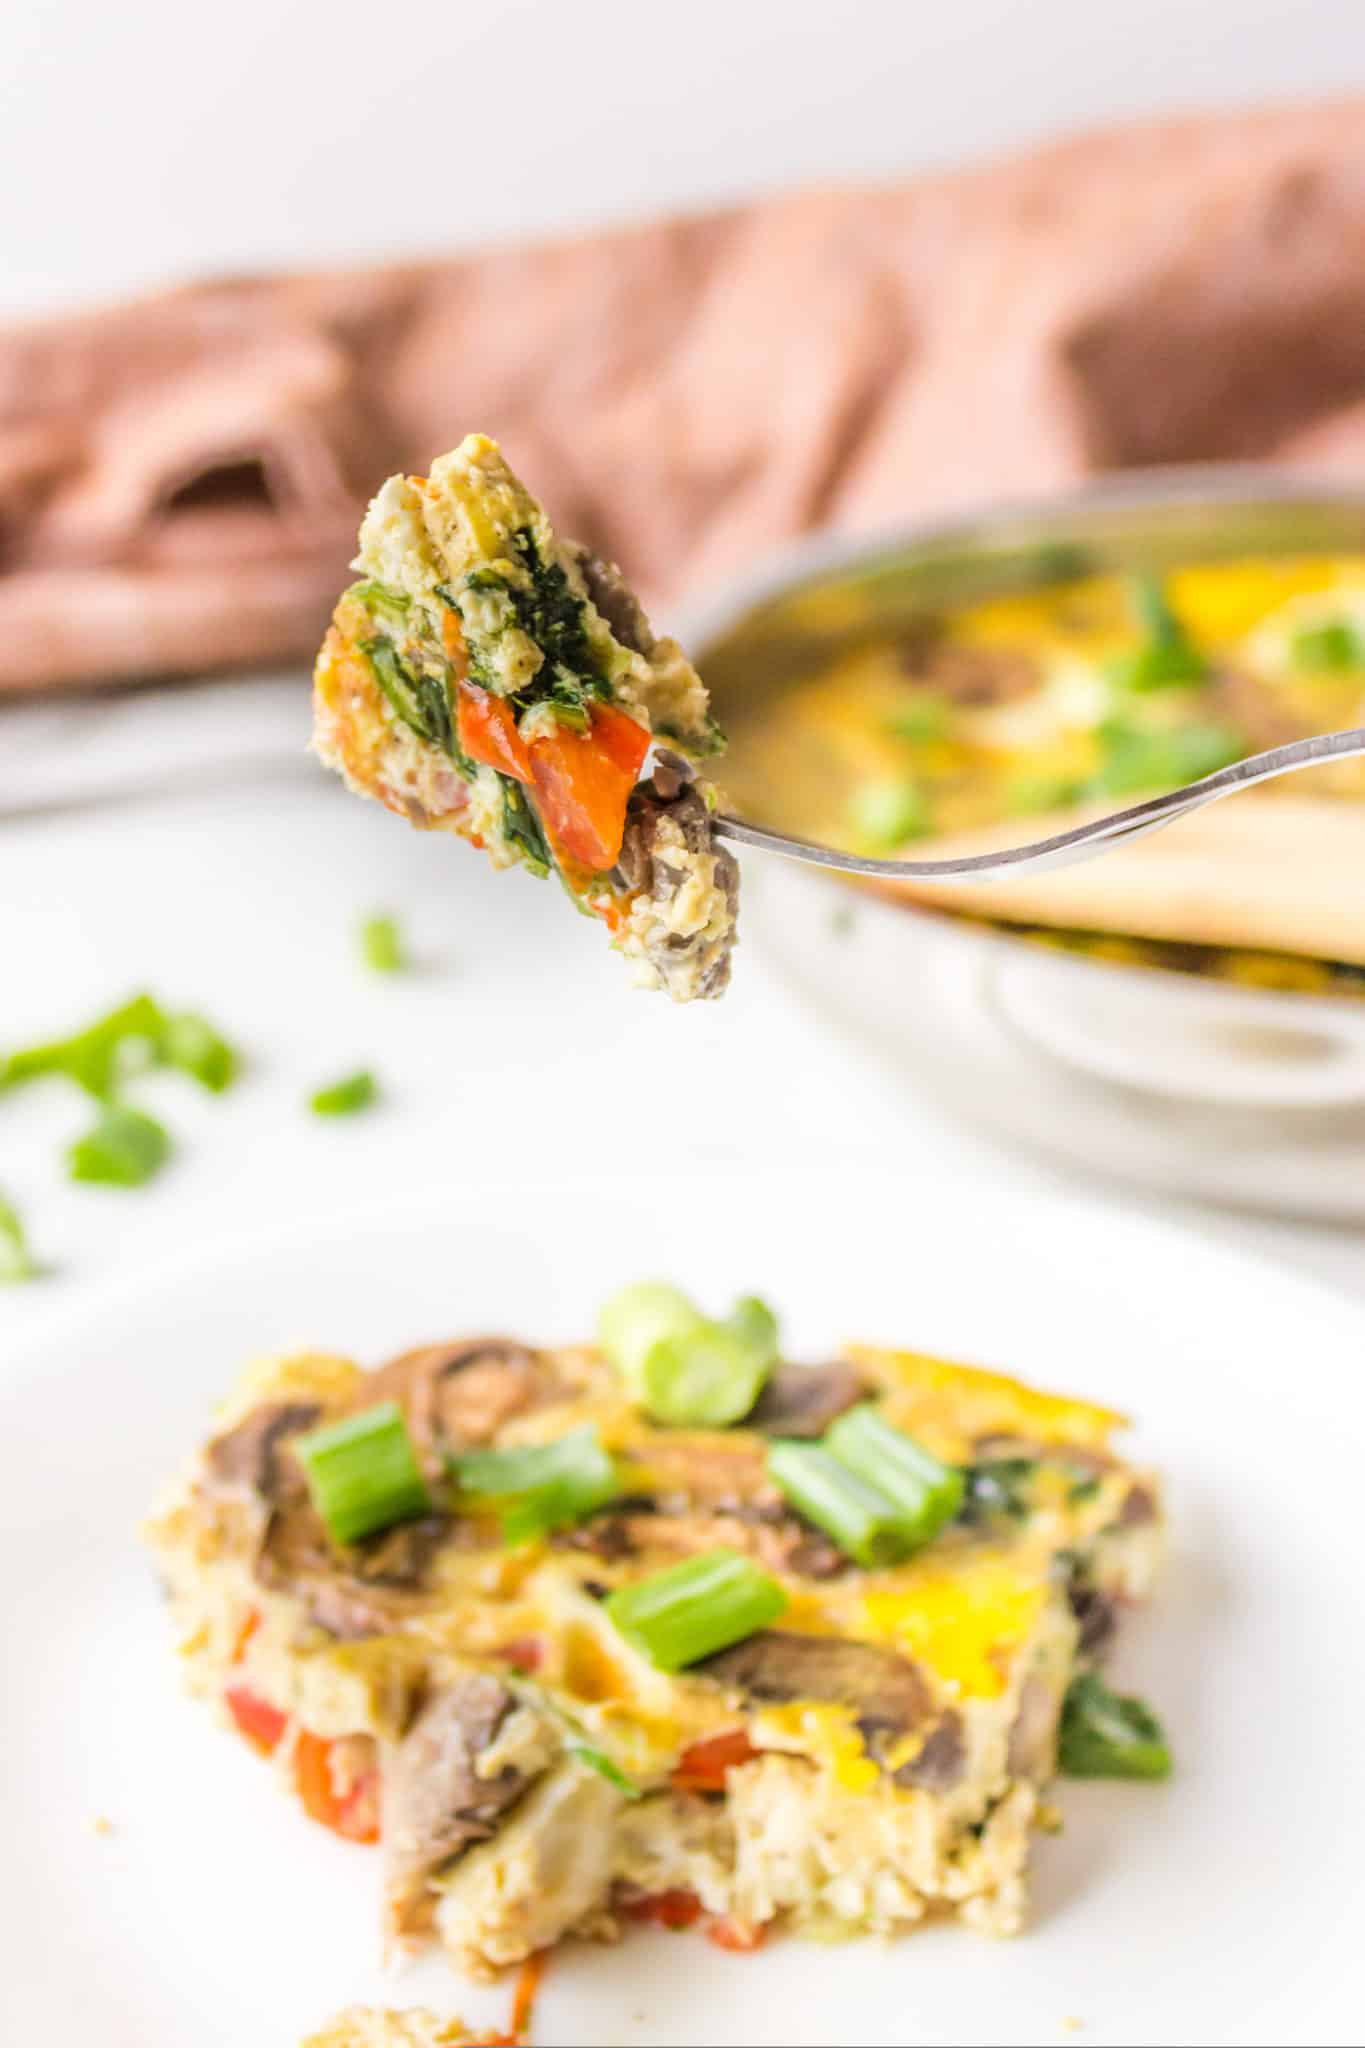 a bite of gluten-free and dairy-free frittata on a fork.